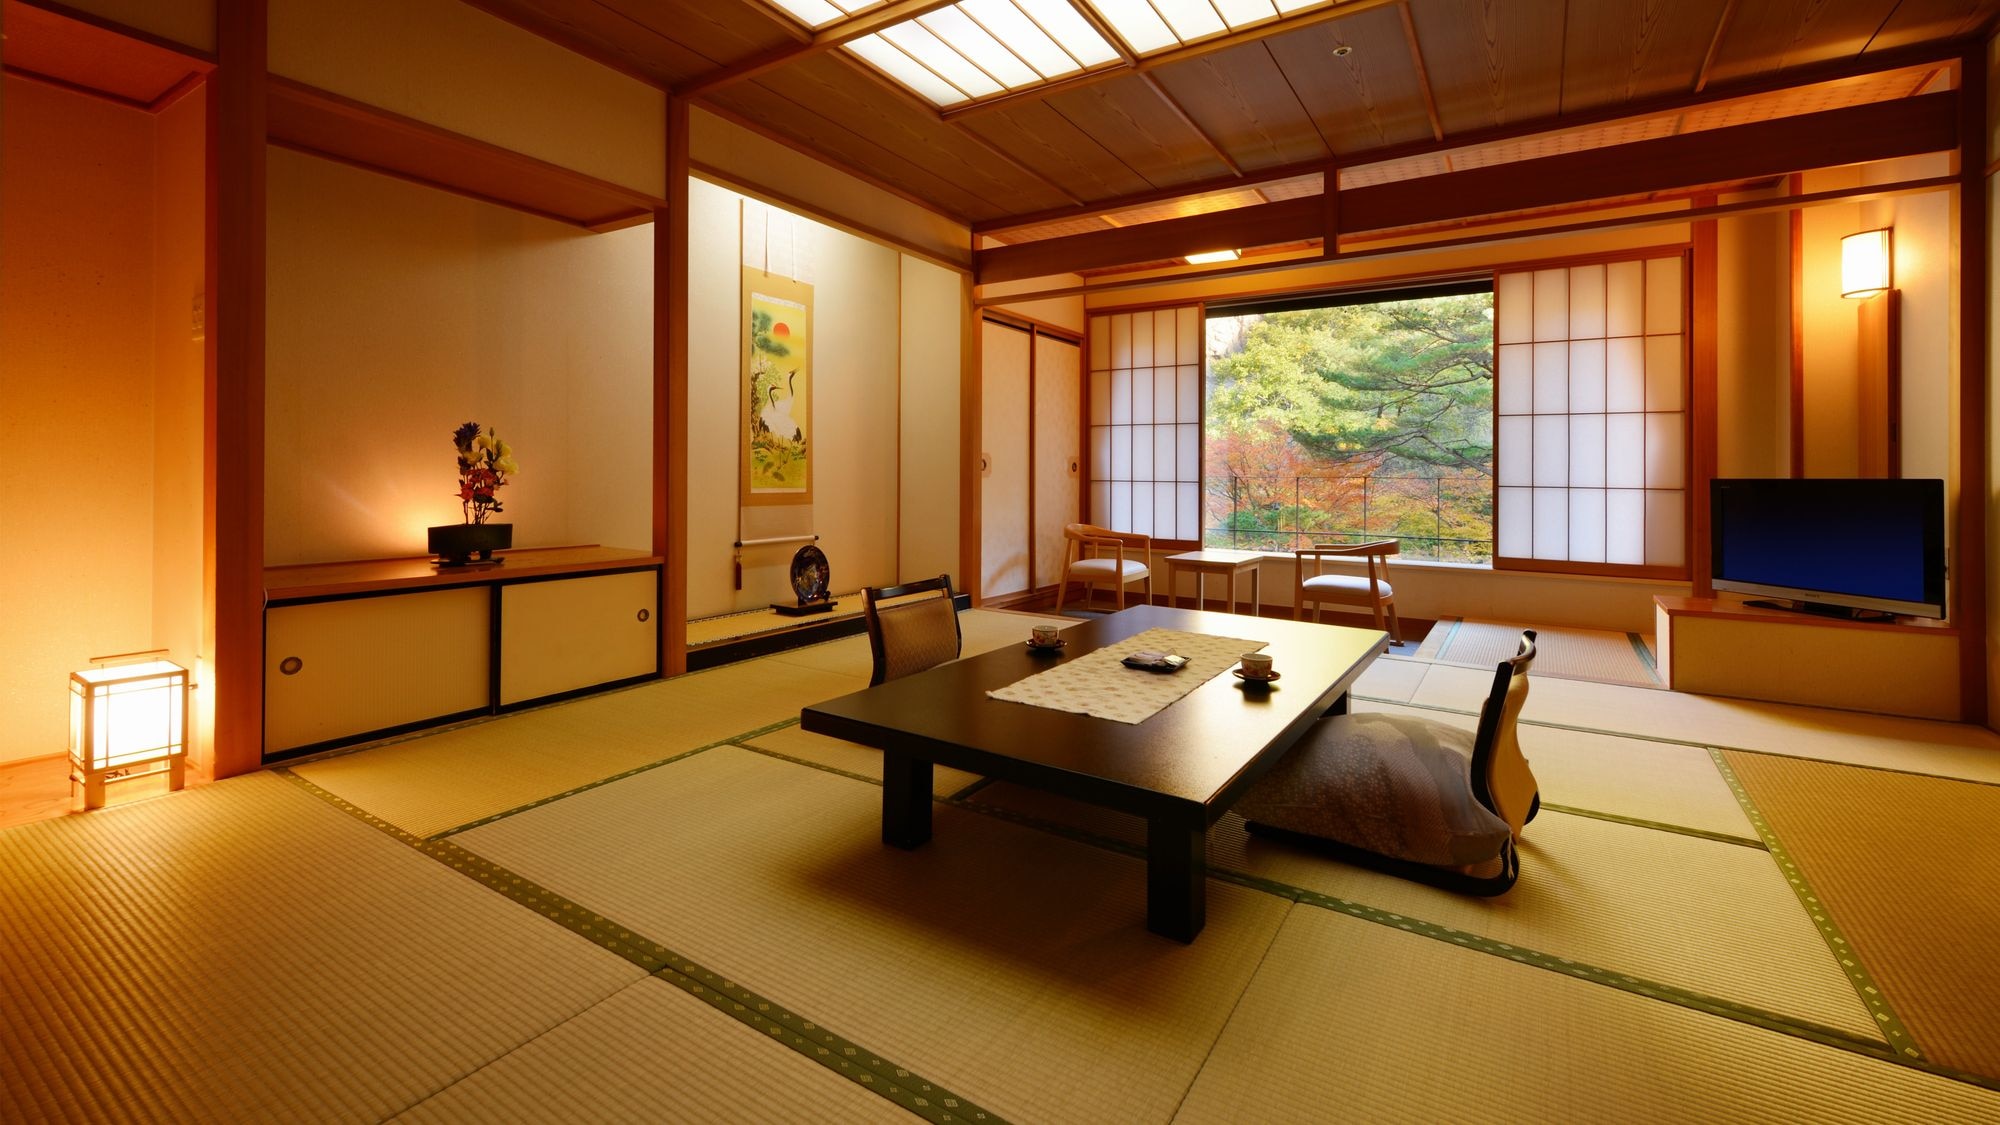 Kachoen room type. From the window, you can enjoy the seasonal flowers and birds Fugetsu. This room is for non-smoking only.